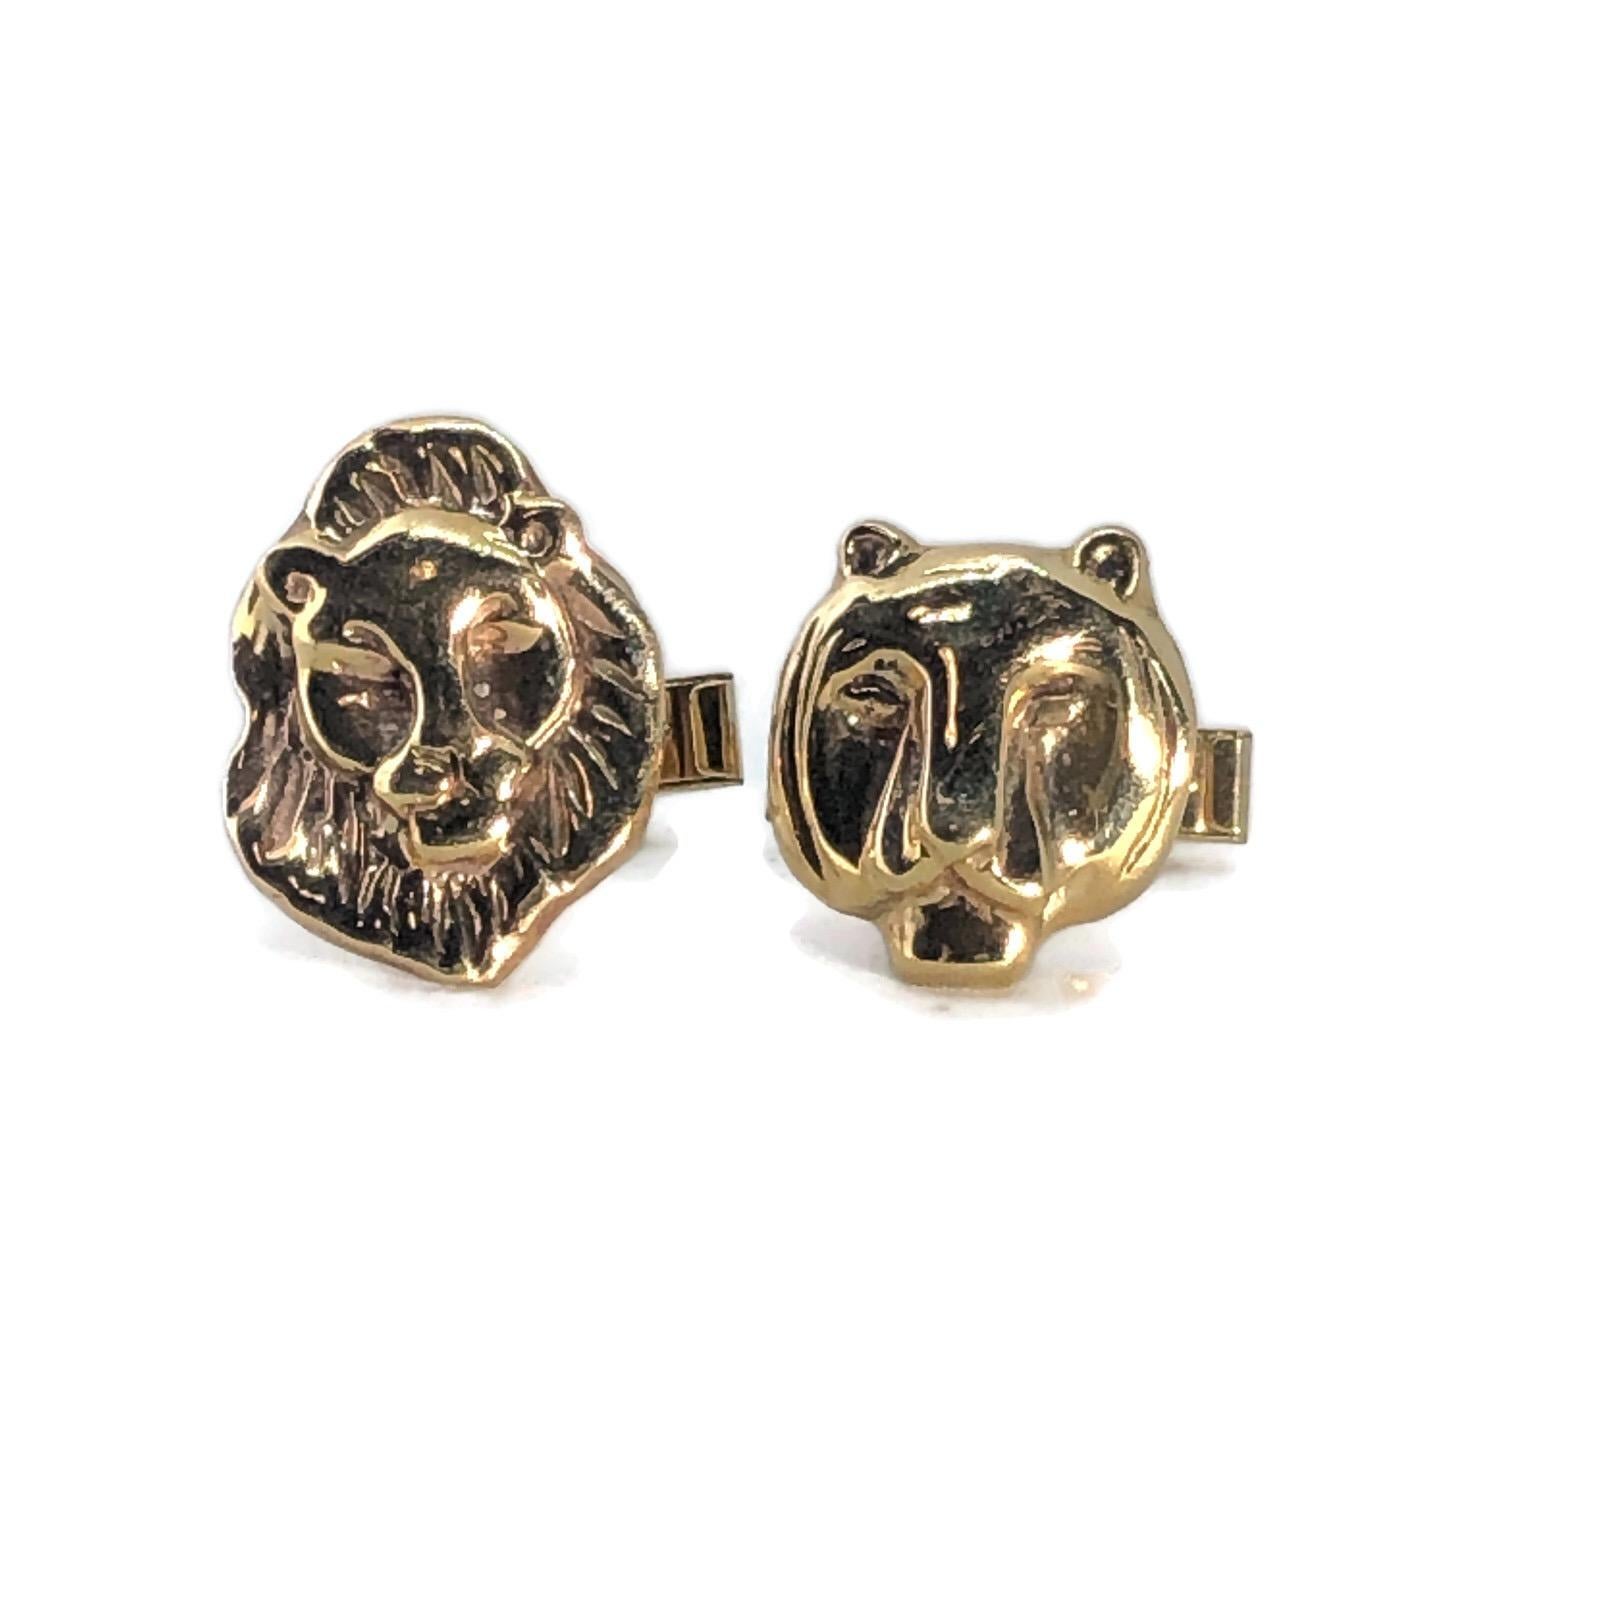 Vintage Unisex Cufflinks in Lion and Lioness Design Made in 14 Karat Yellow Gold For Sale 3